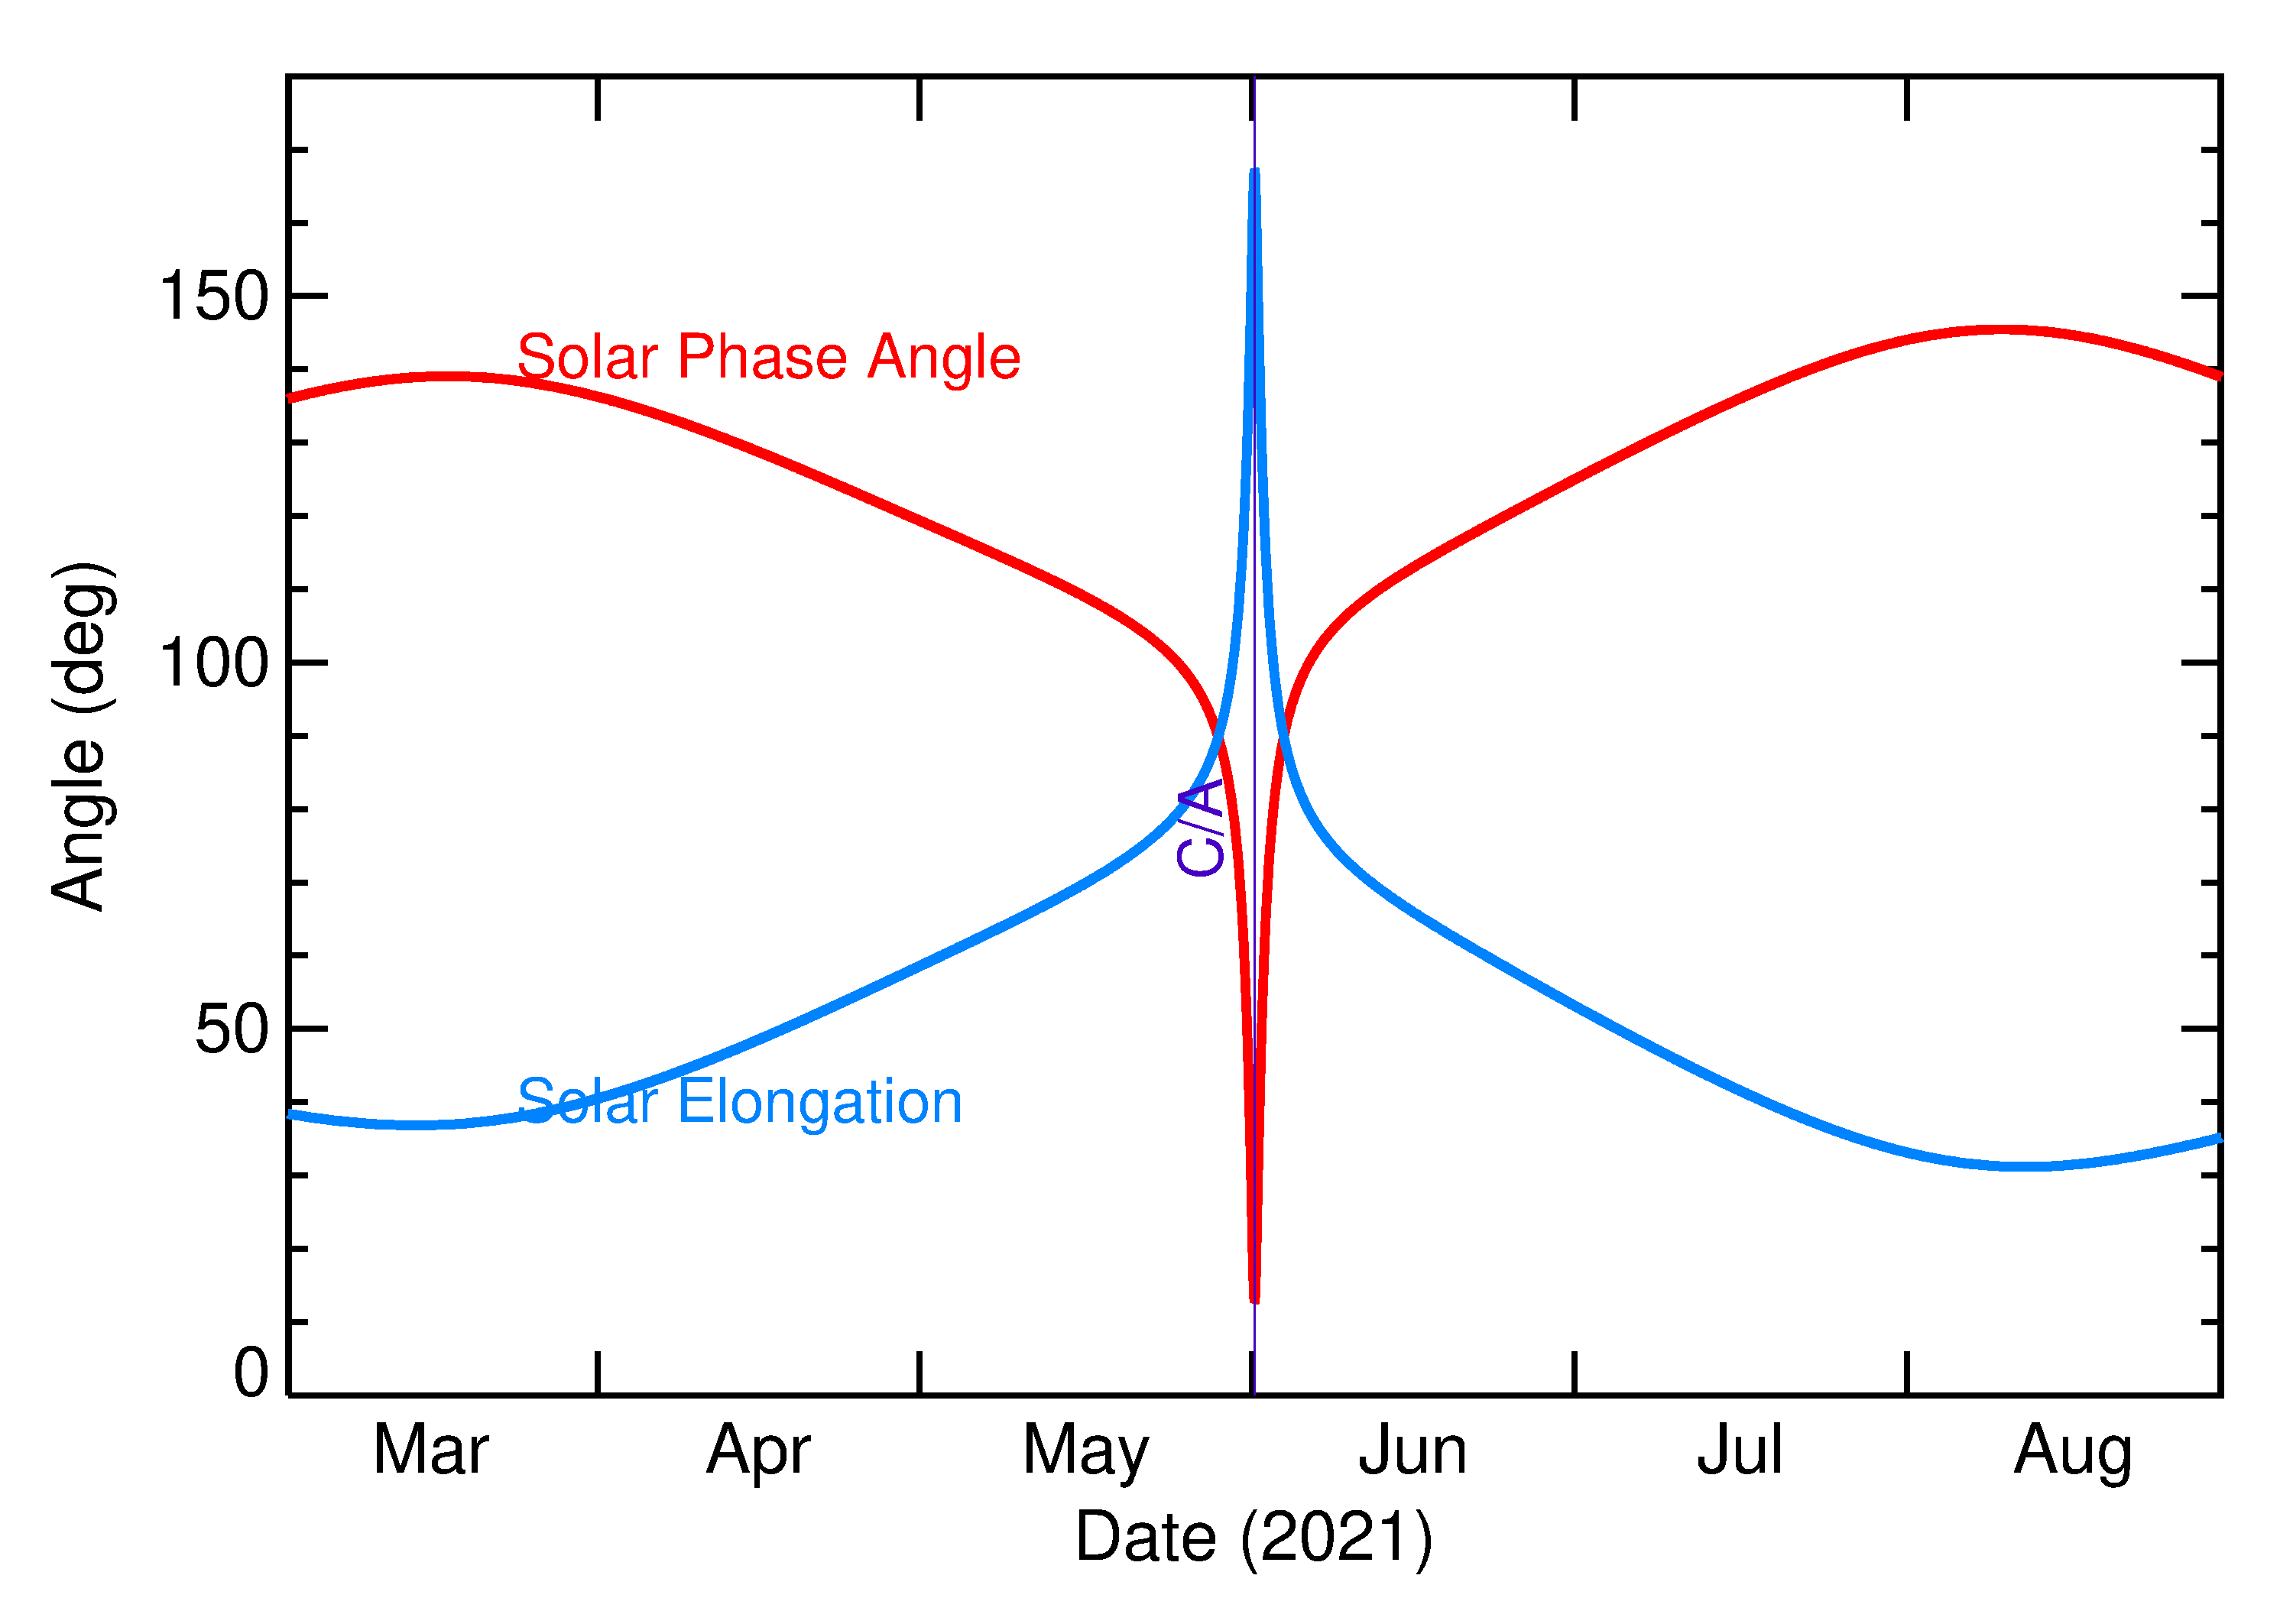 Solar Elongation and Solar Phase Angle of 2021 KQ2 in the months around closest approach